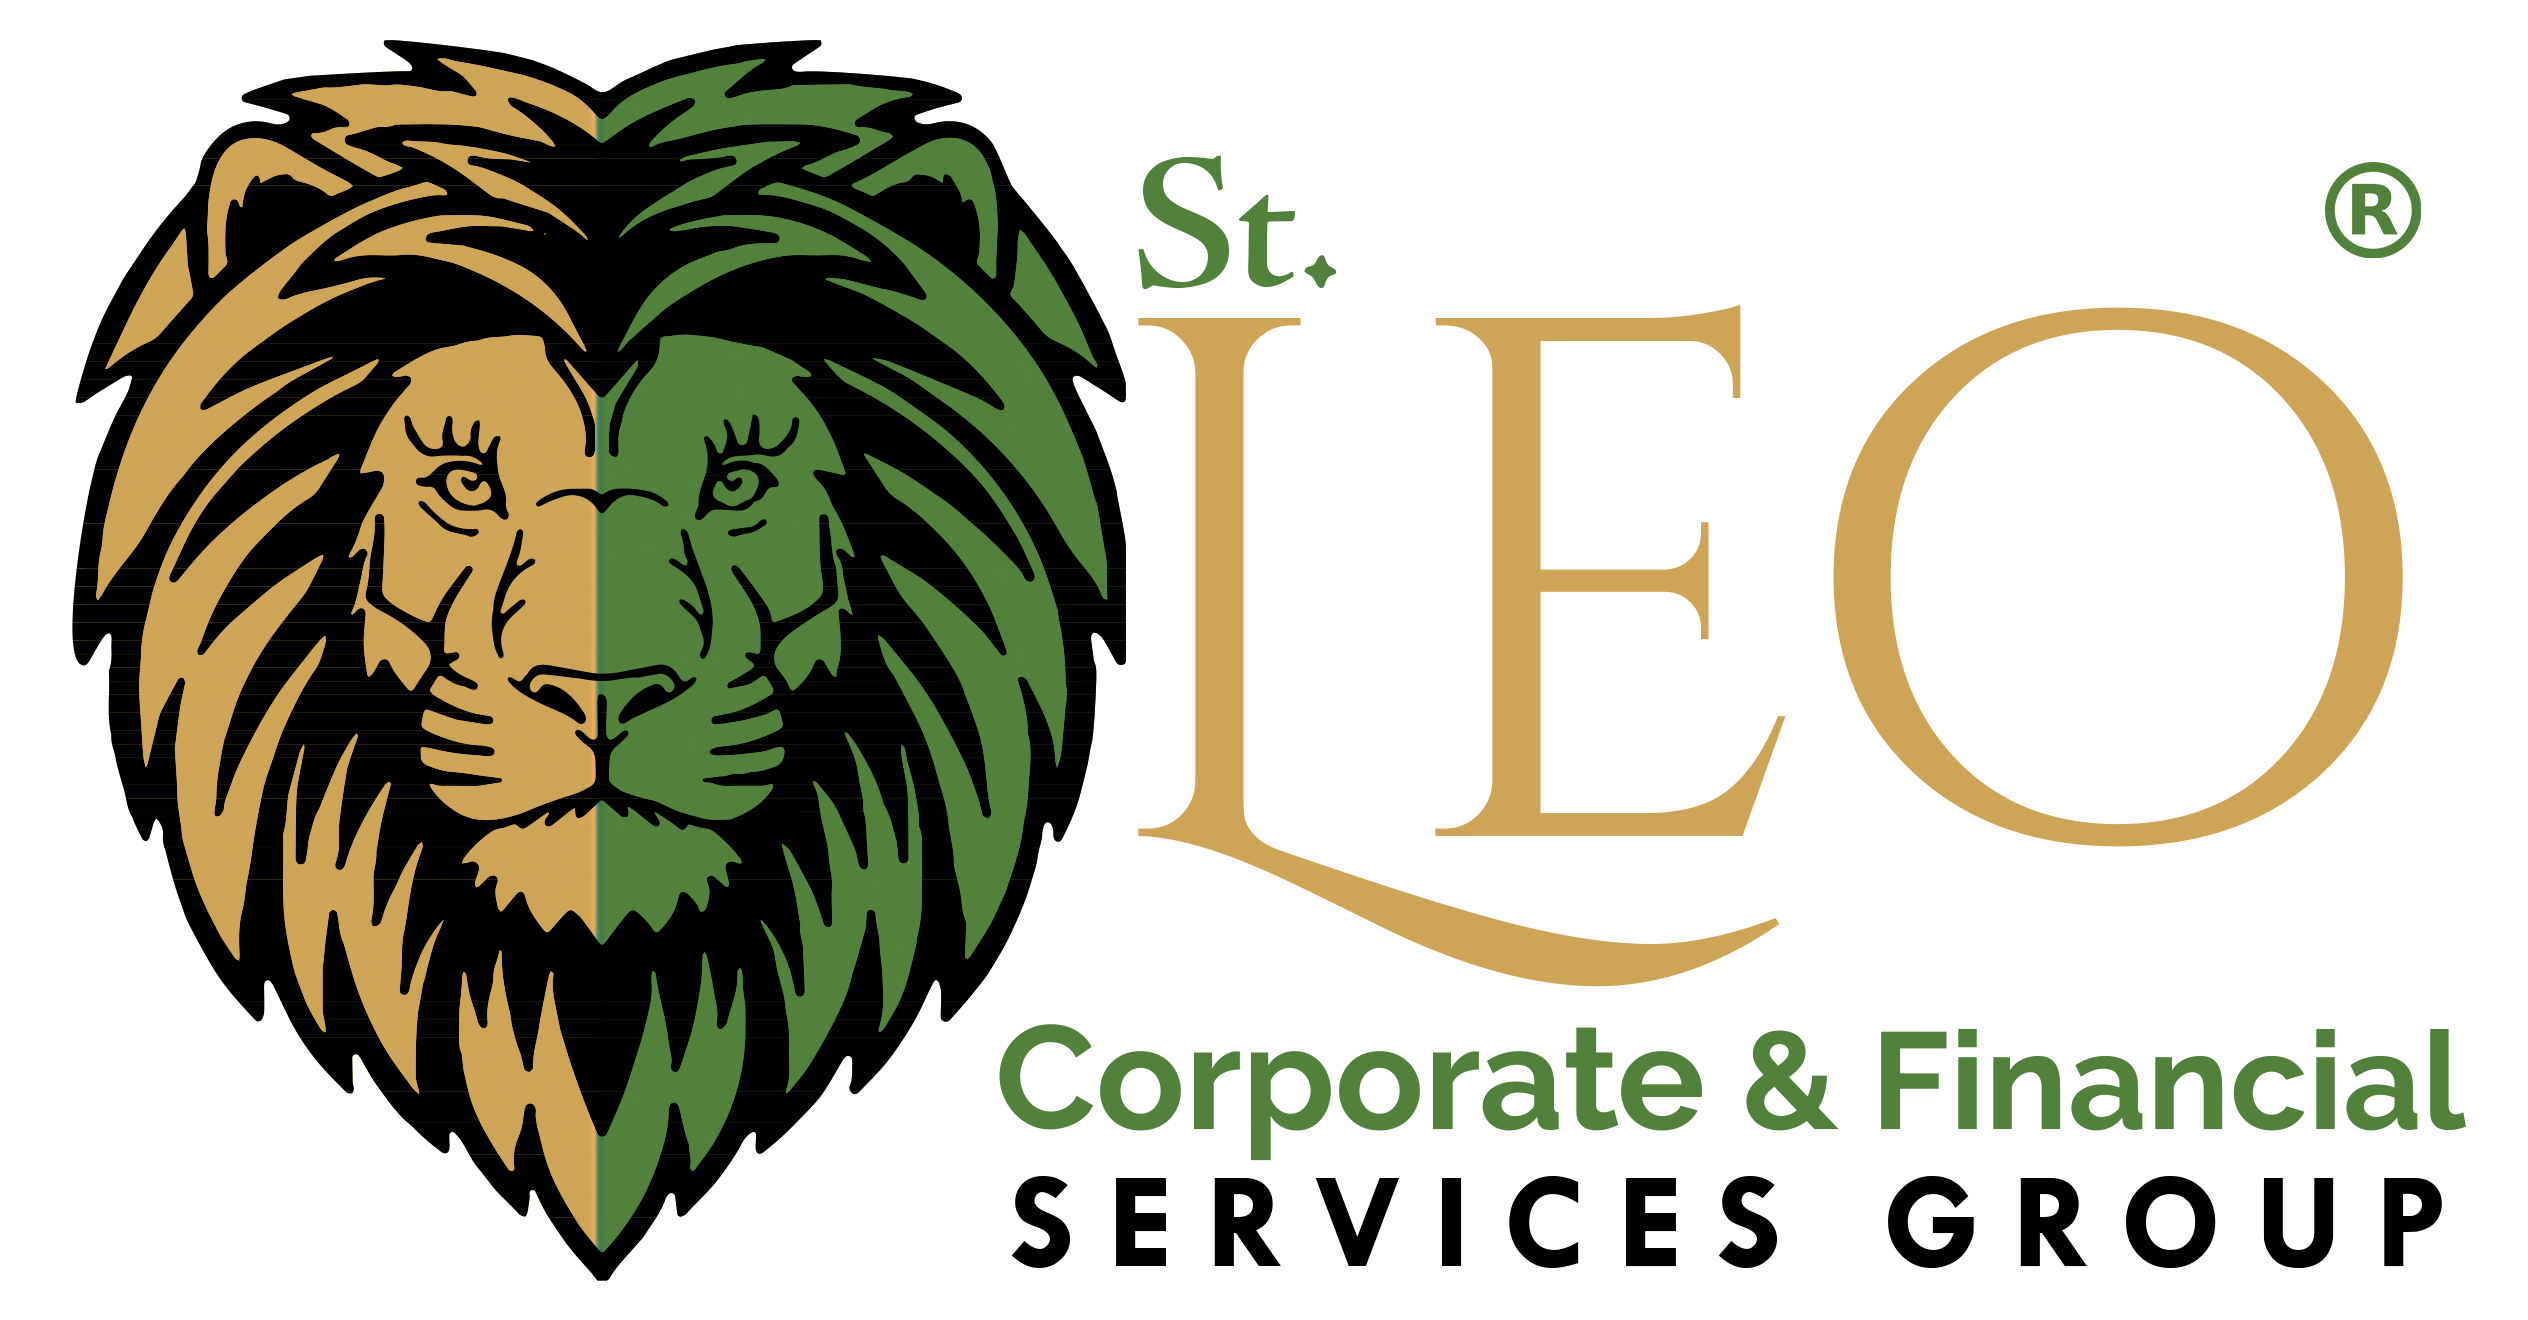 St. Leo Corporate & Financial Services Group.